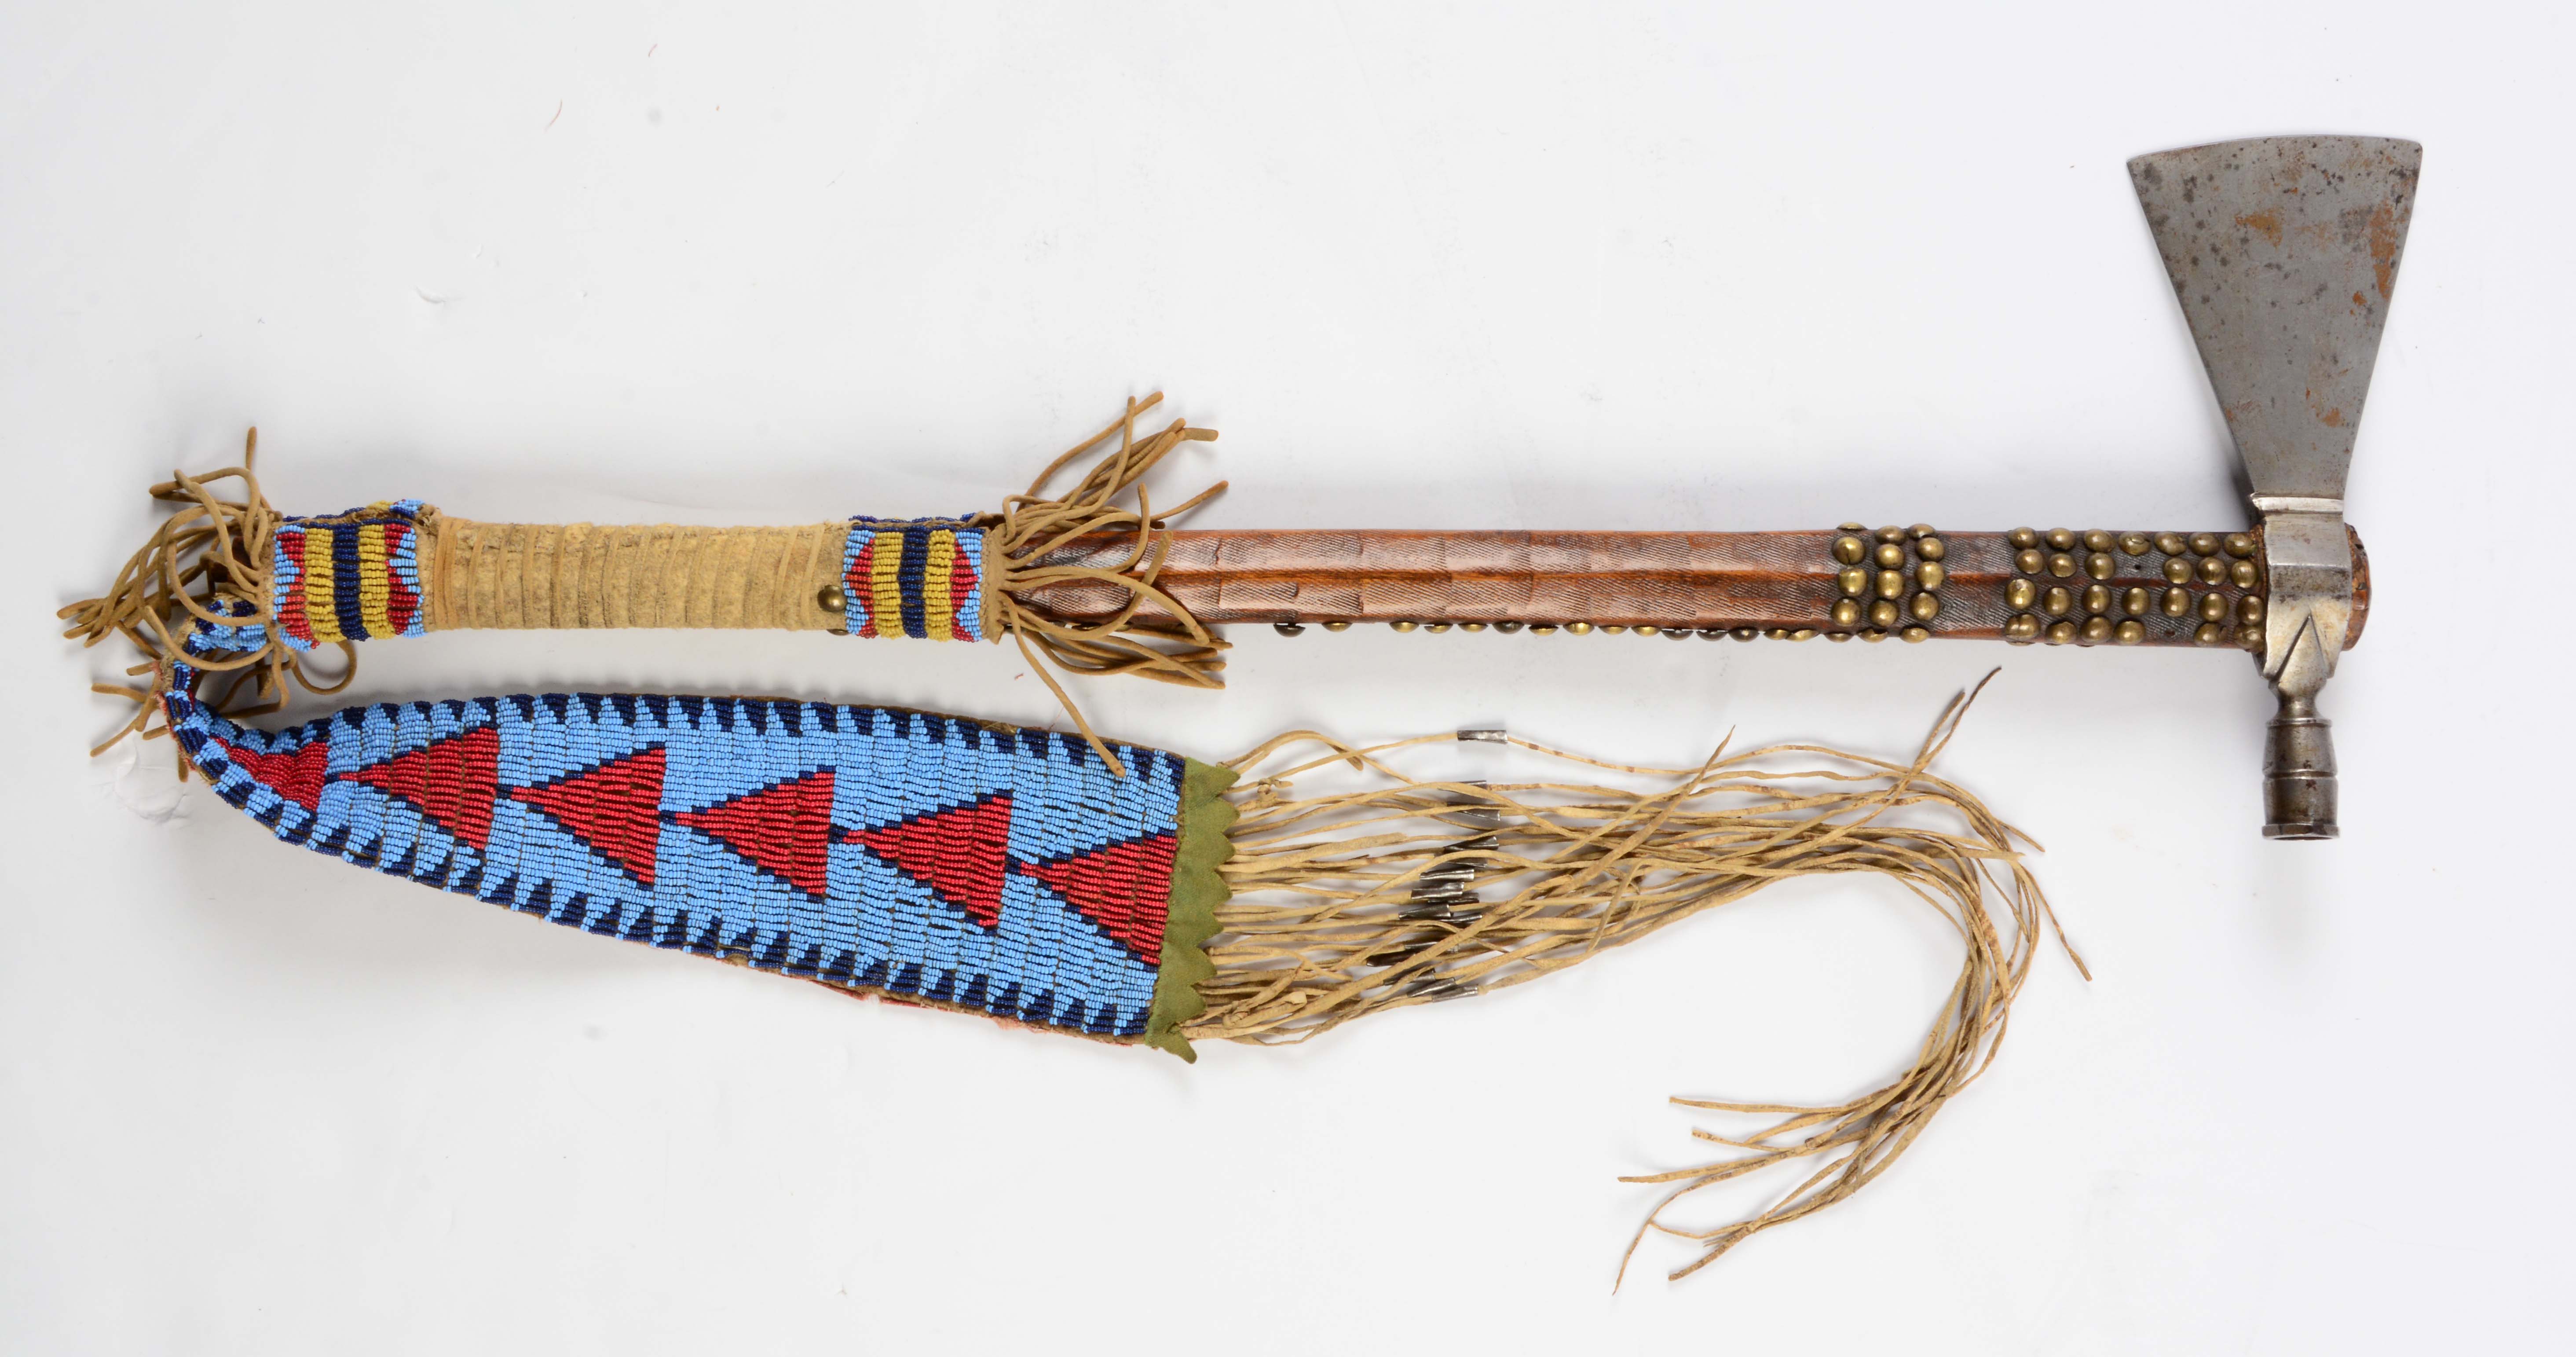 Cheyenne Pipe Tomahawk with Beaded Drop, Estimated at $30,000-50,000.